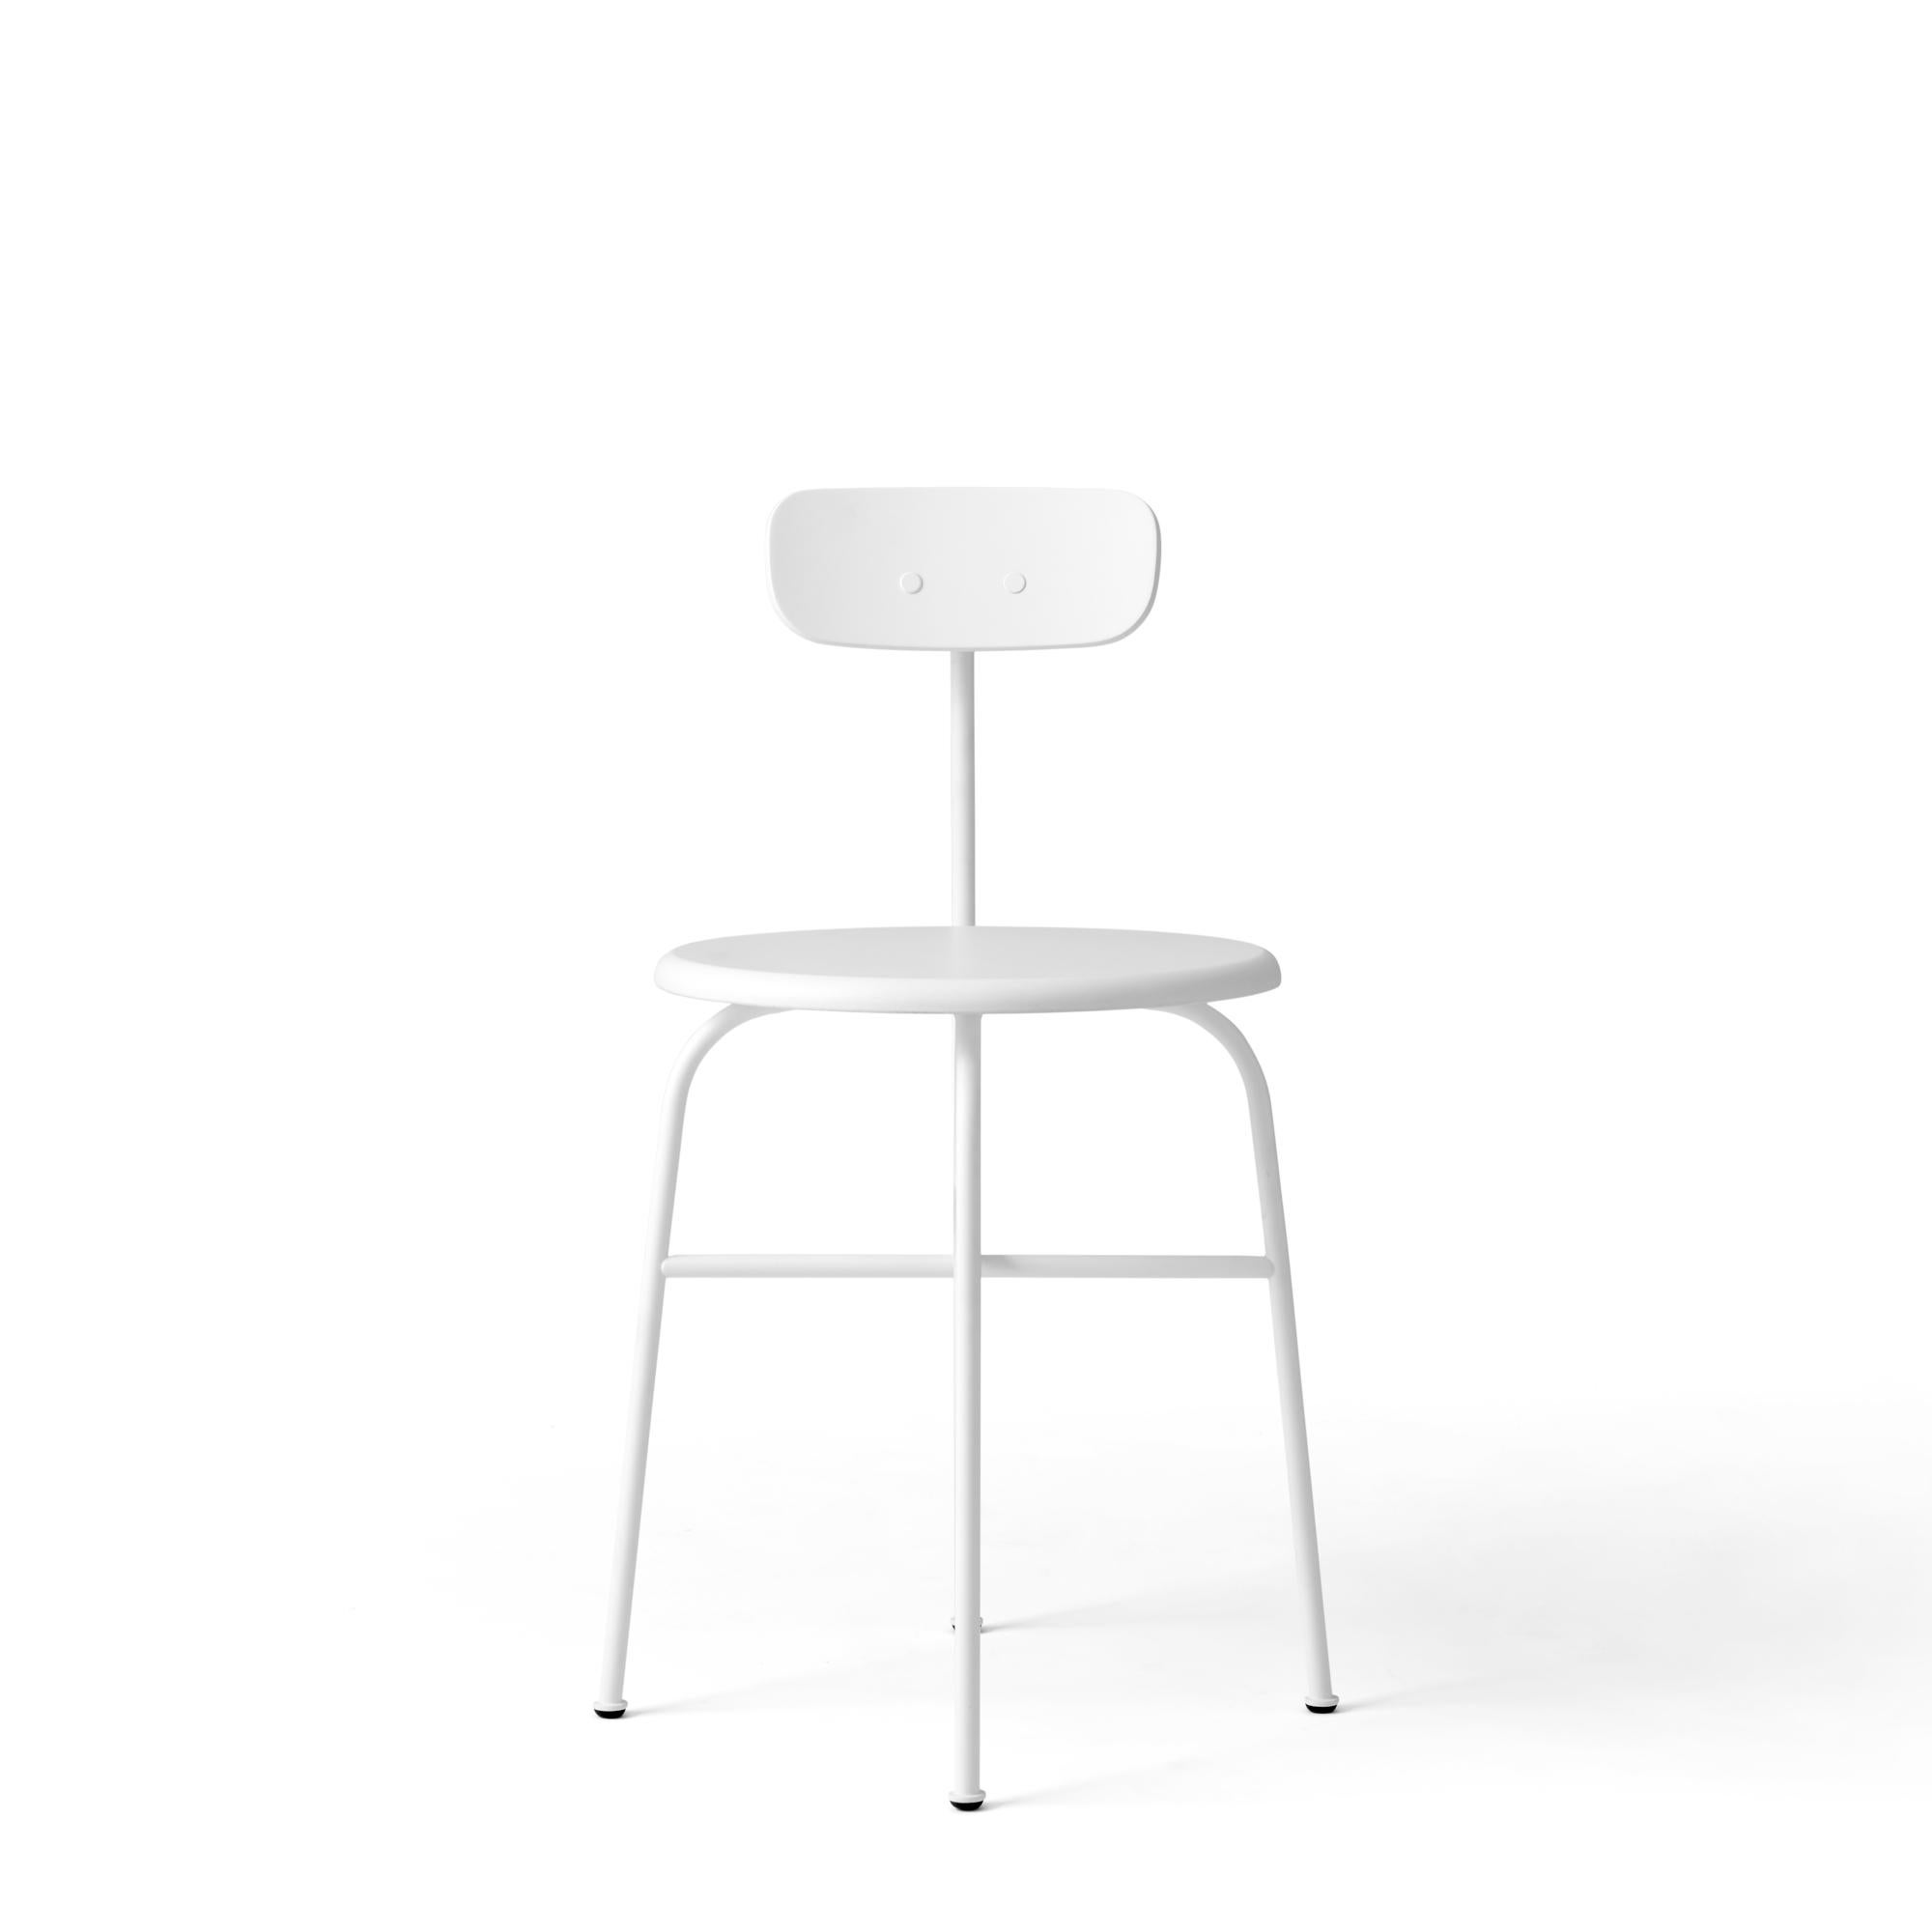 A beautifully minimal chair for everyday life, the Afteroom chair takes inspiration from the philosophy of the Bauhaus school. A Menu bestseller since its launch in 2012, the chair is the work of Afteroom, a young Stockholm studio founded by